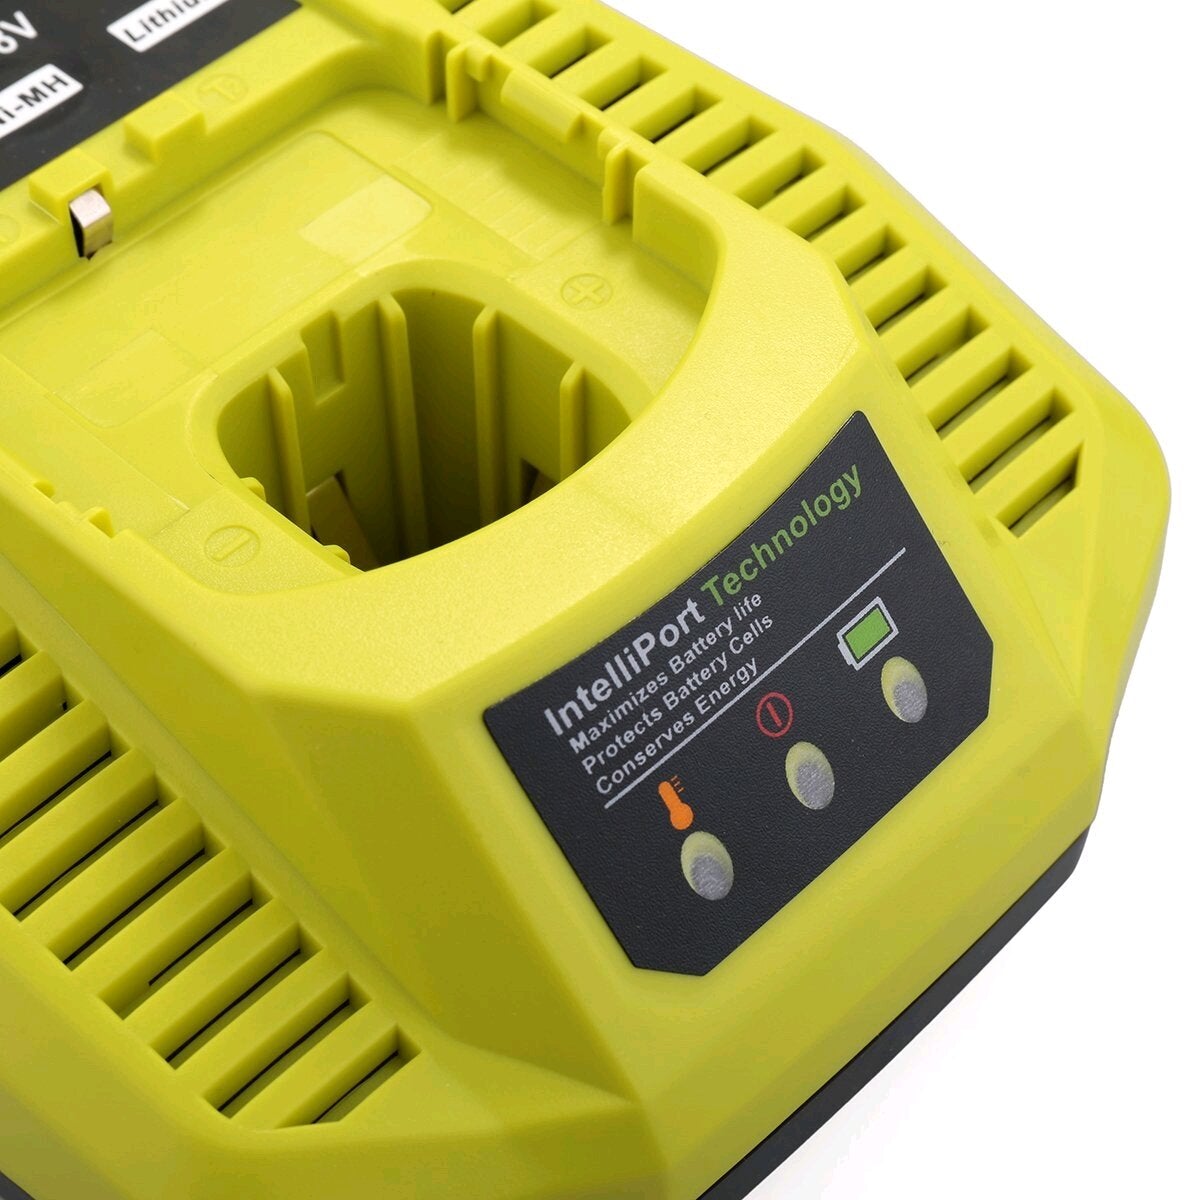 12V-18V Battery Charger Lithium Battery Nickel Charge Replacement for Ryobi One Plus P100 P101 P102 P103 P104 P105 P106 P107 P108